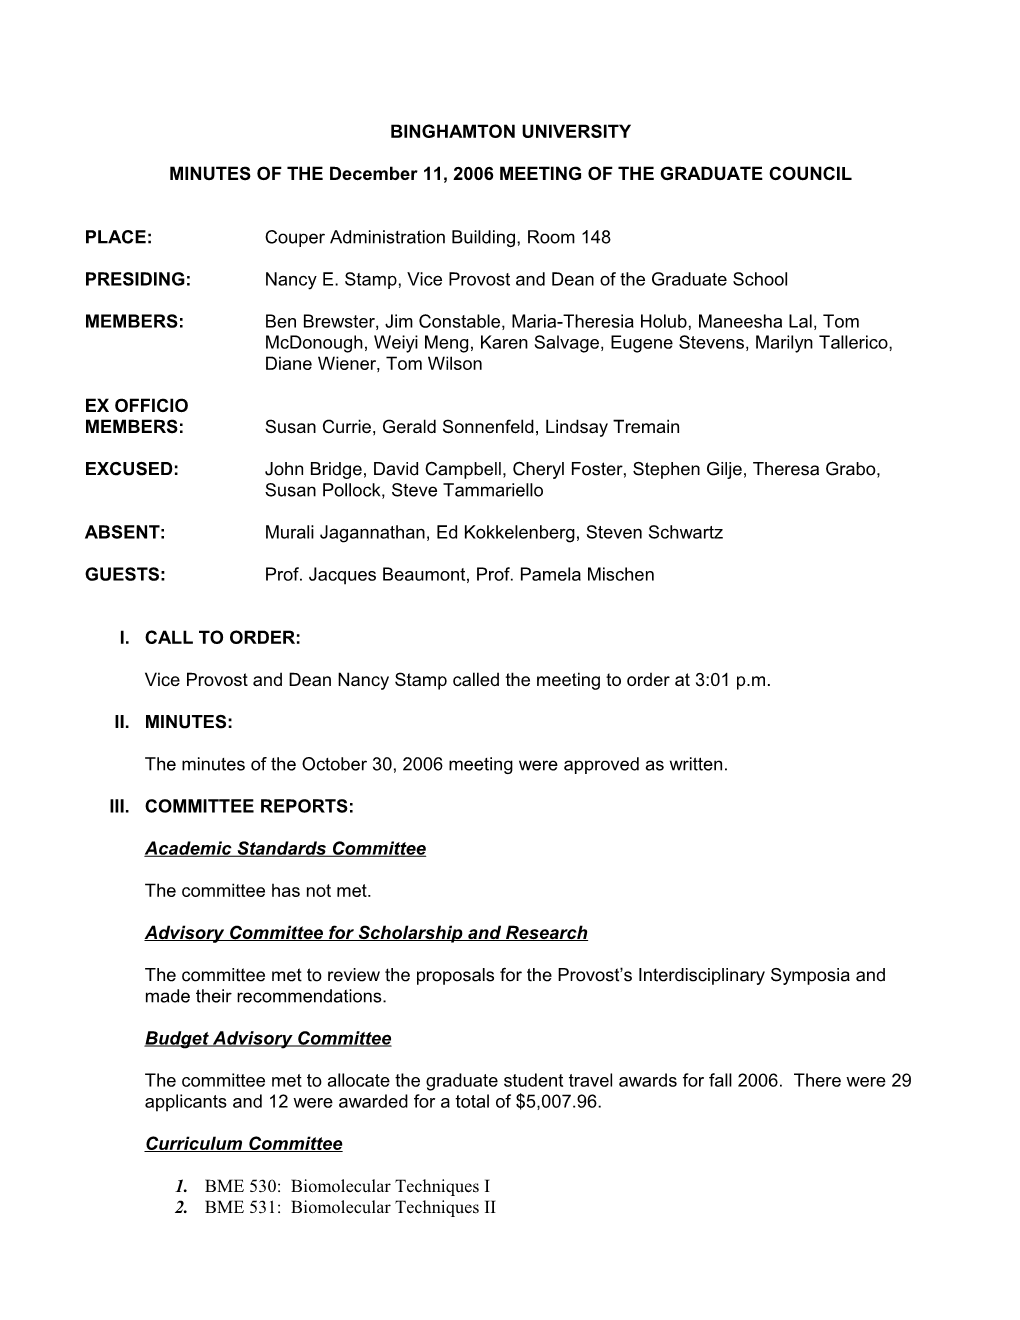 MINUTES of the December 11, 2006 MEETING of the GRADUATE COUNCIL